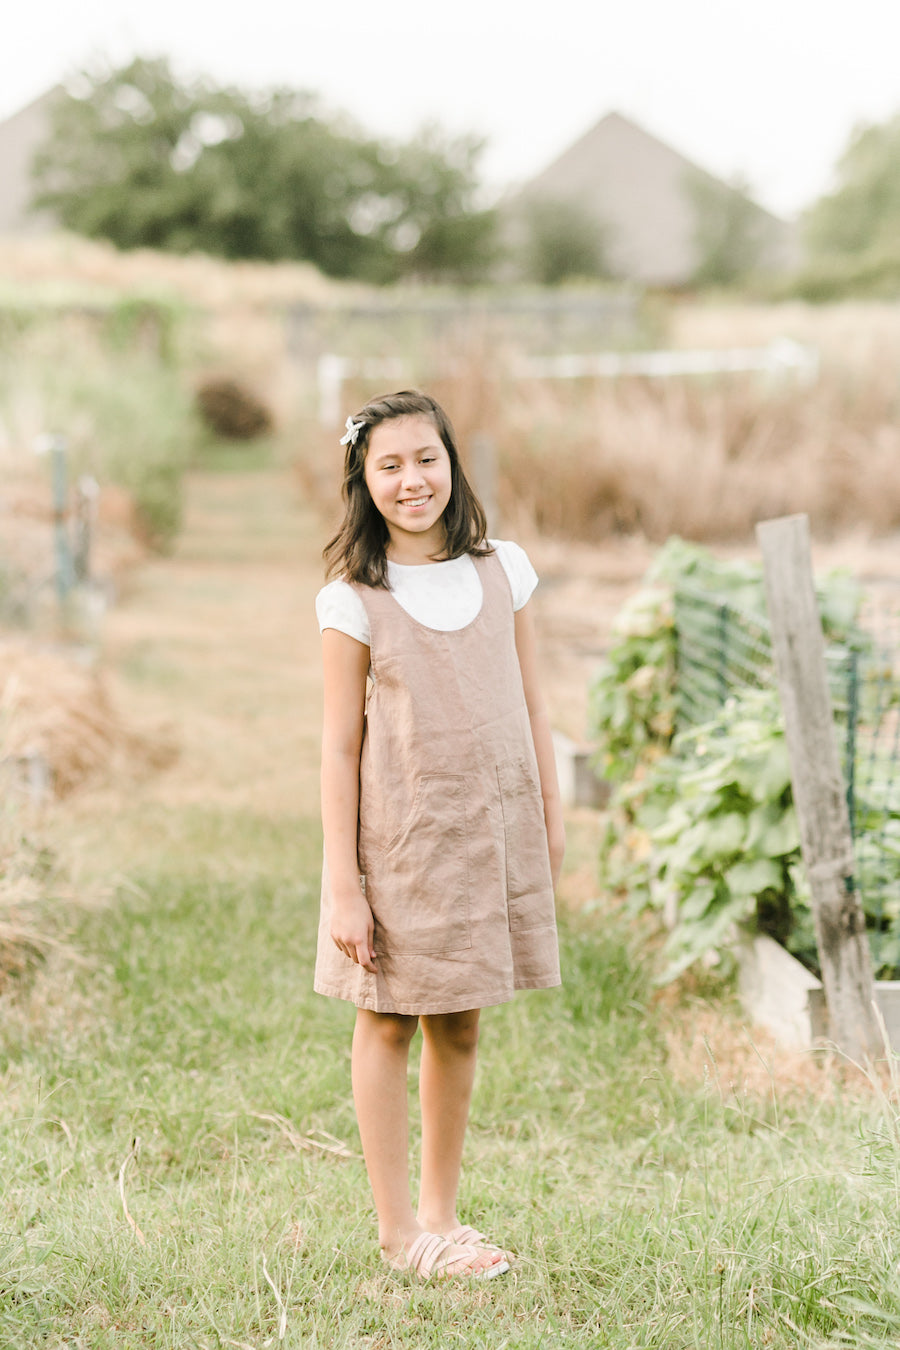 Girls Pinafore Dresses | Next Official Site